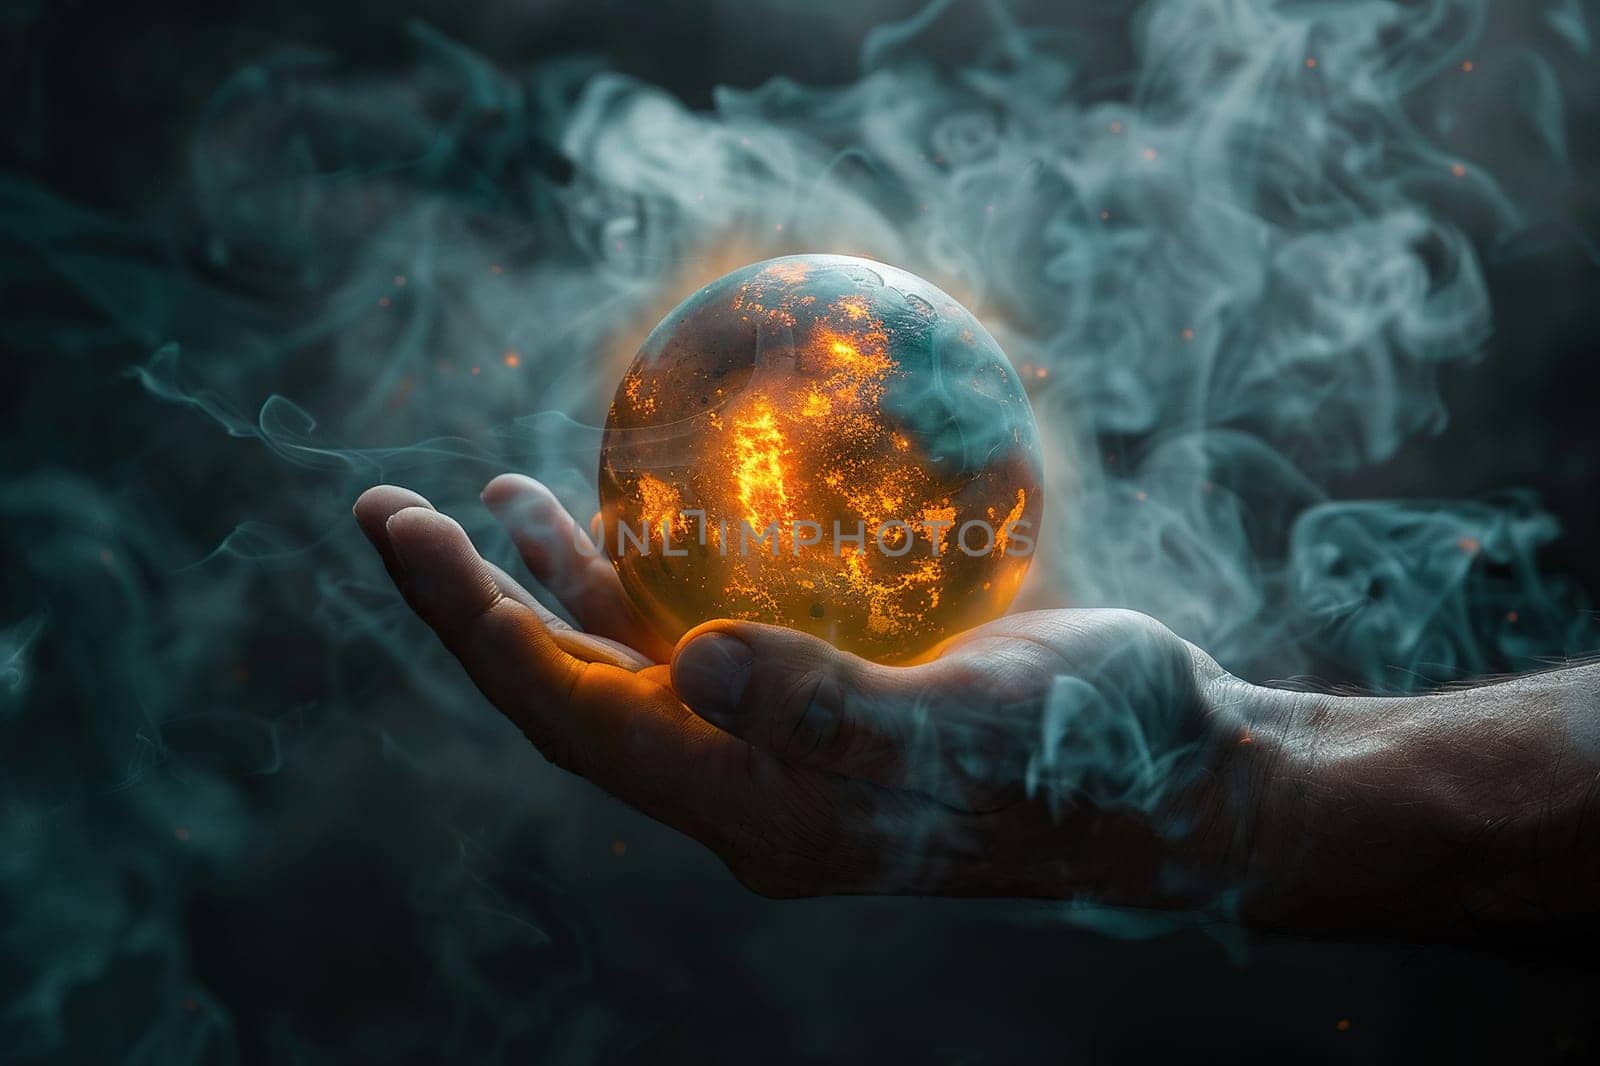 A man's hand holds a glowing ball in the form of a planet in clouds of smoke on a dark background.